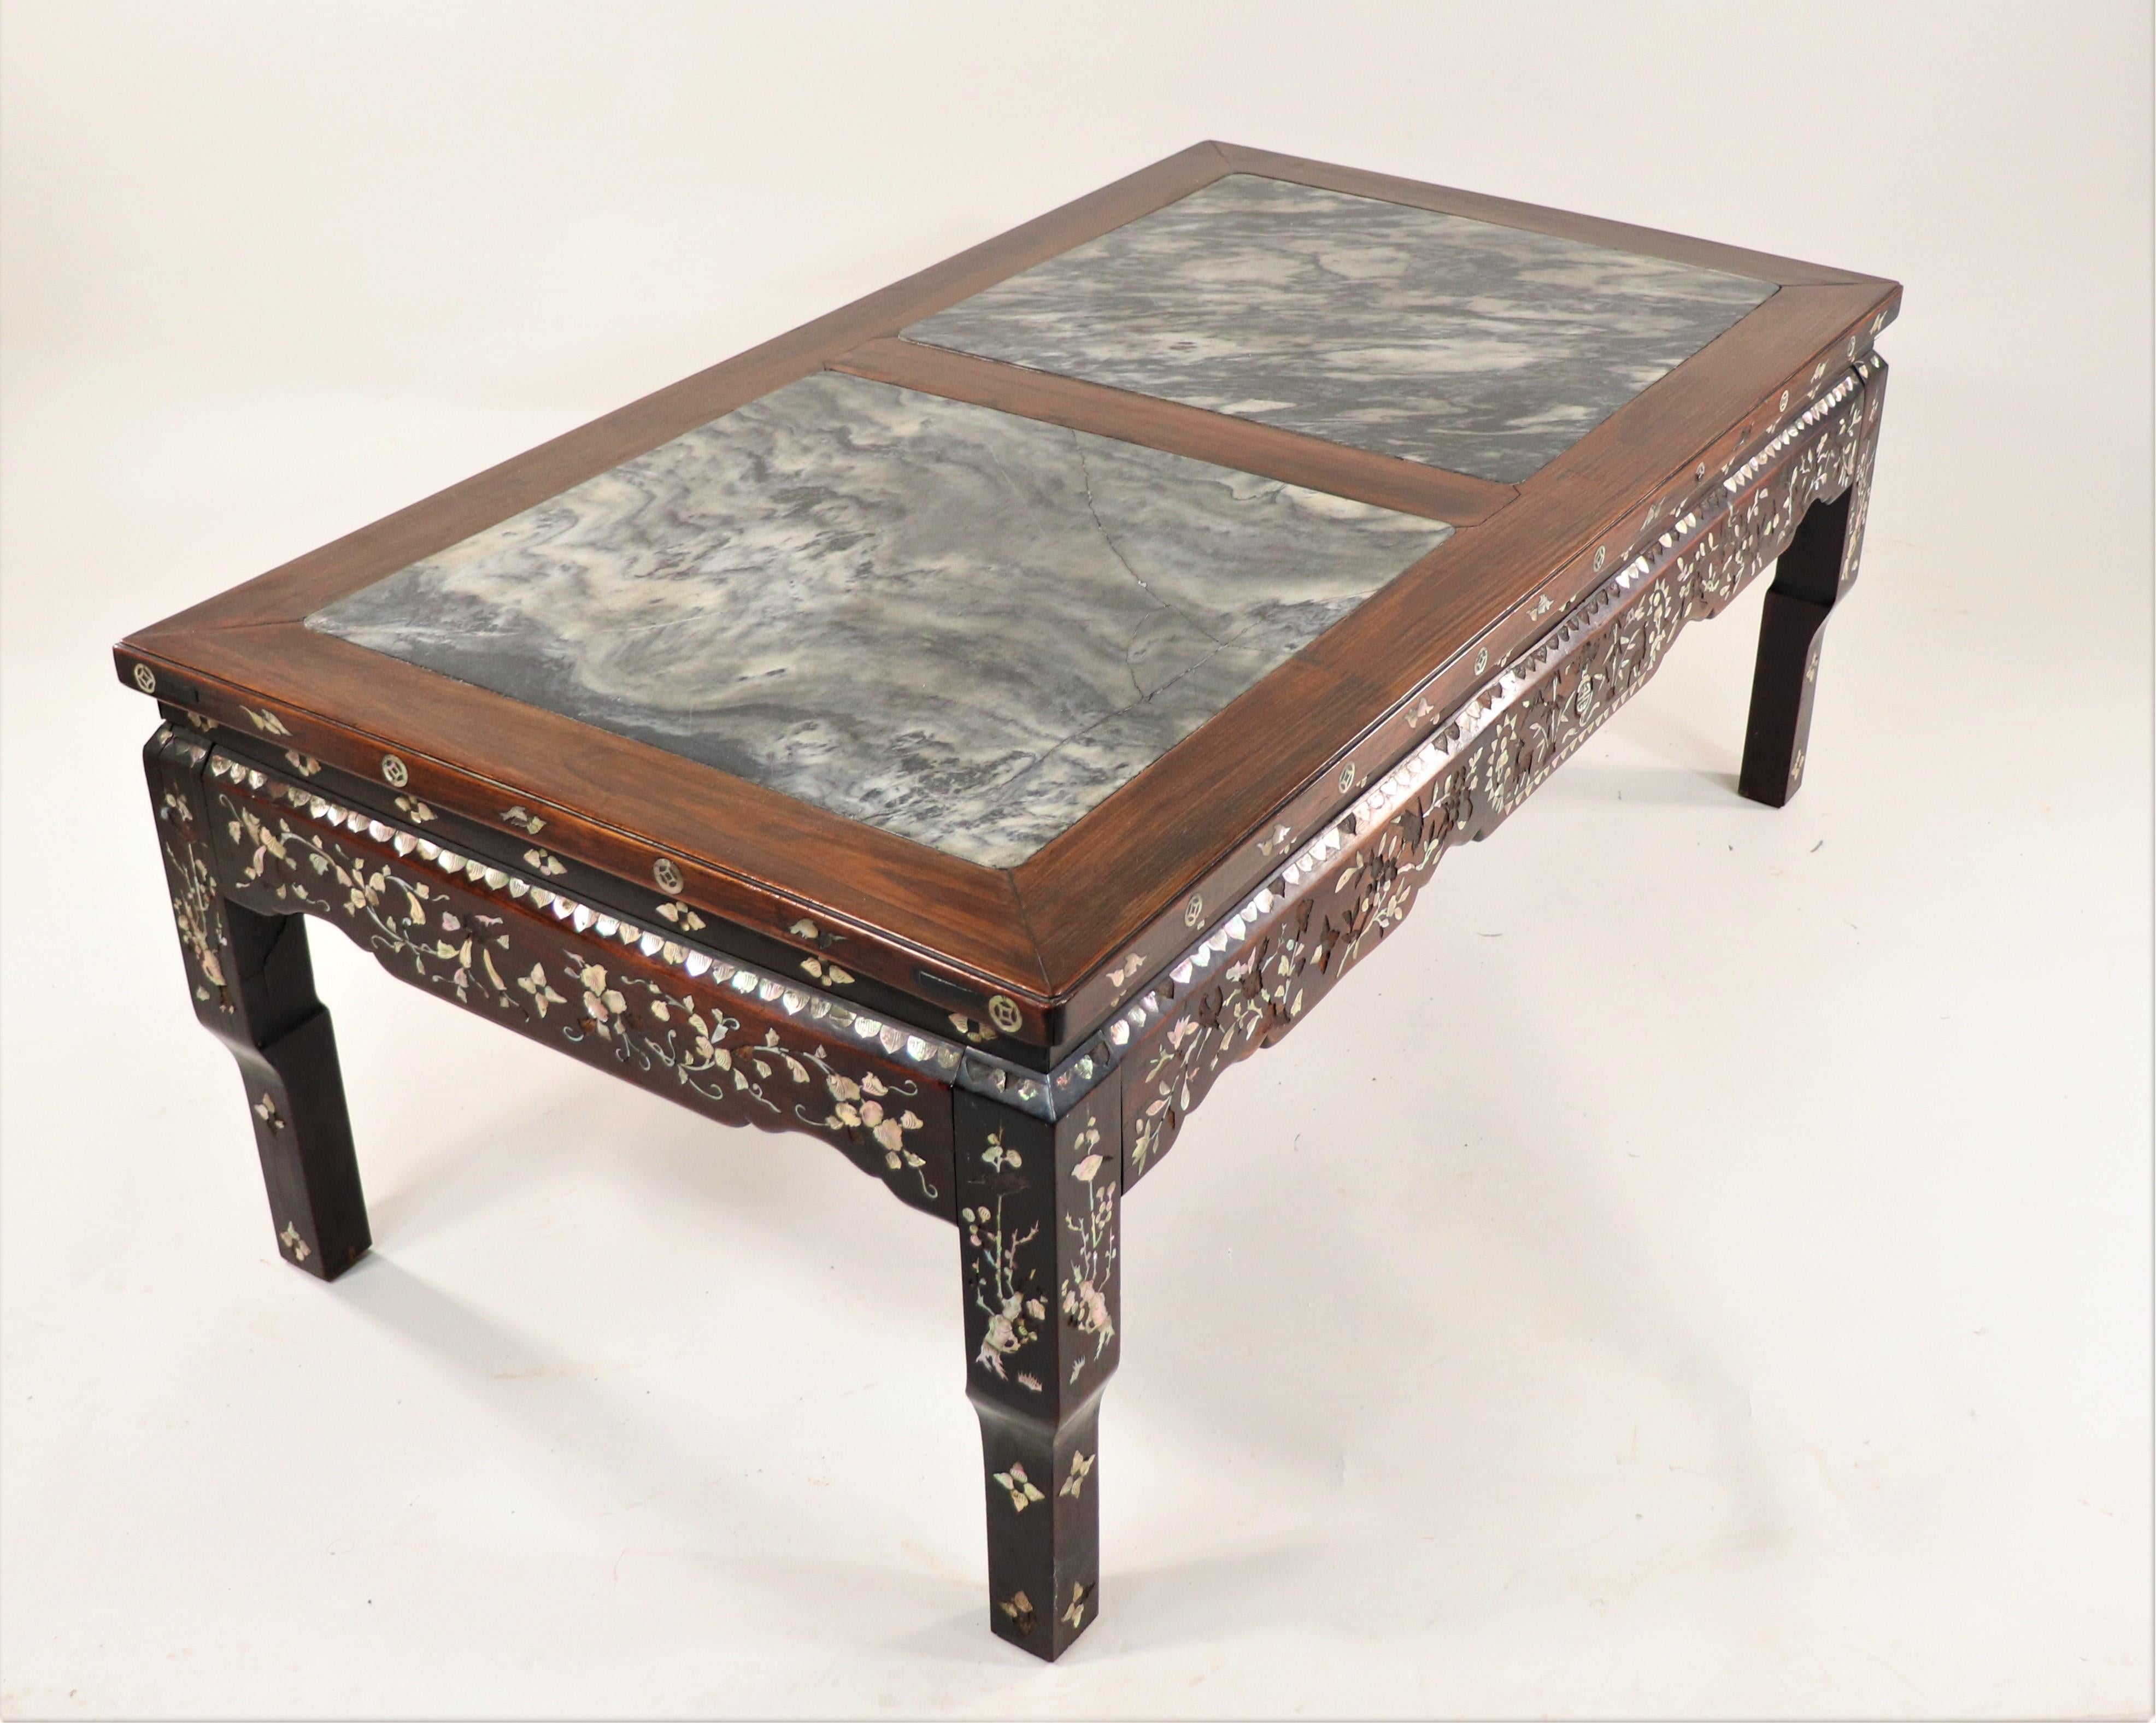 This beautifully hand-carved coffee table features a marble inset top with mother-of-pearl inlay decoration. These tables are popular due to their beautiful aesthetic, craftsmanship, and overall attention to detail. Many coffee tables were